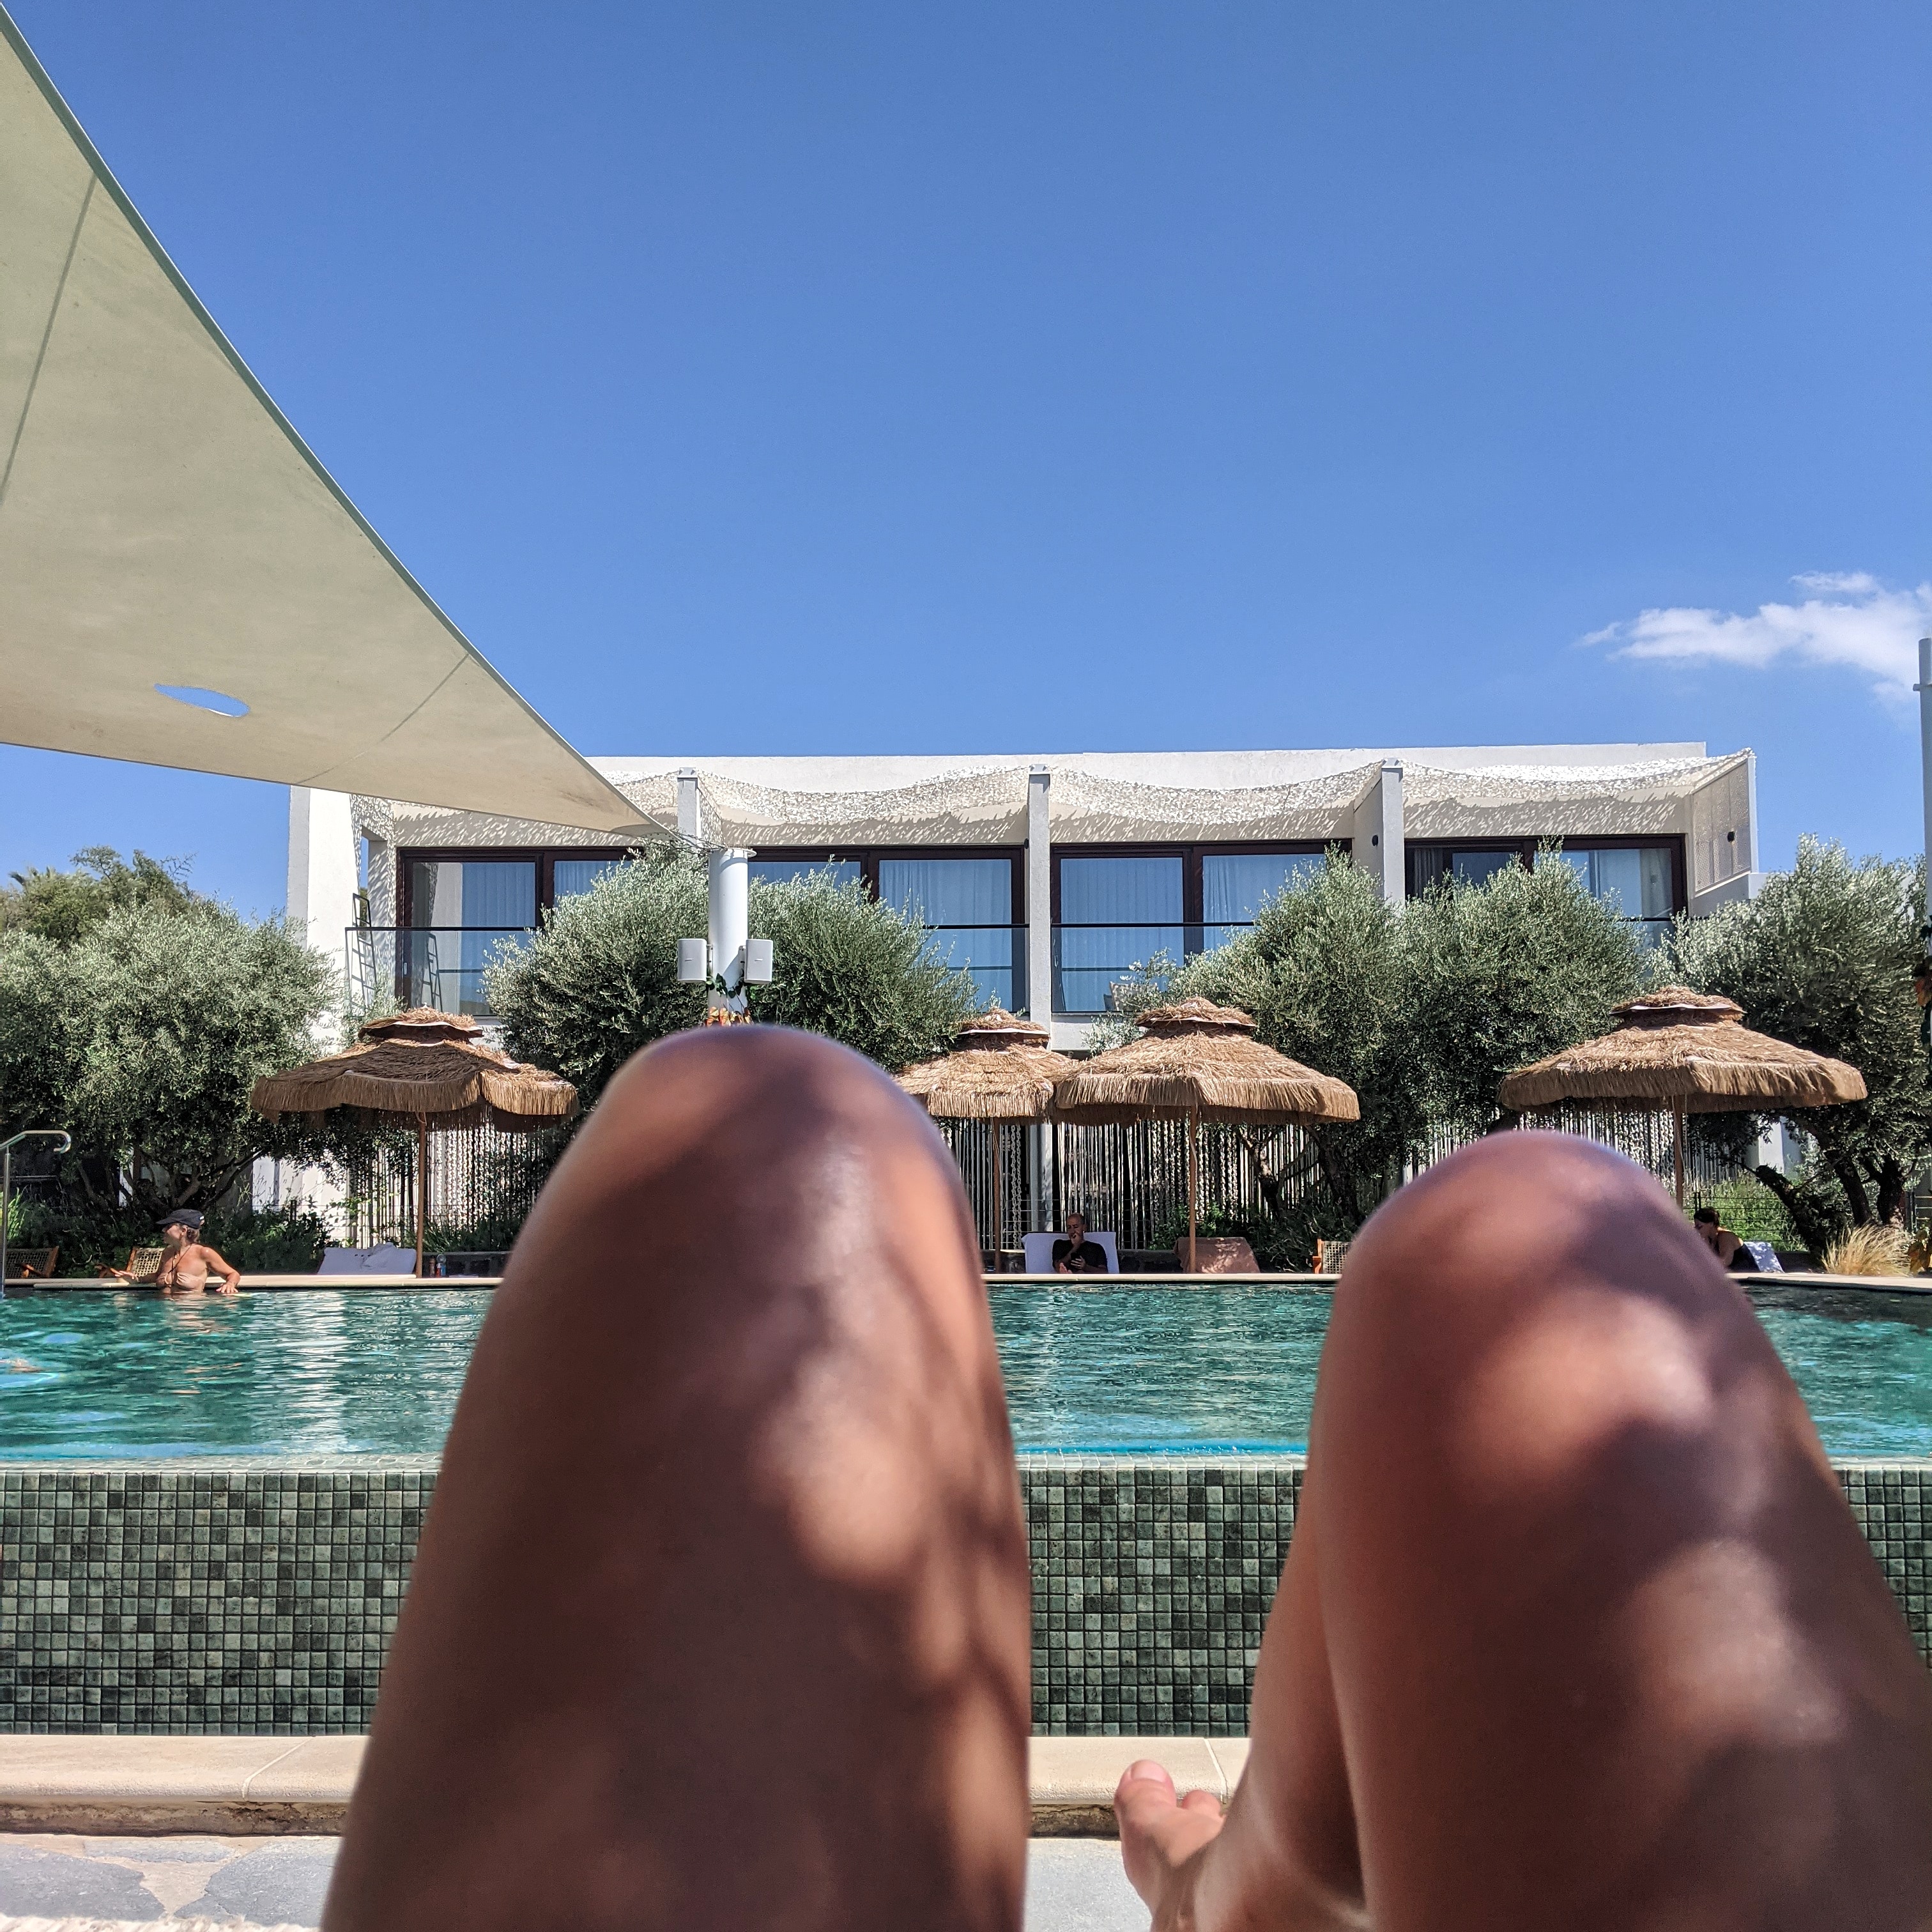 sitting by the pool at pereh hotel in israel